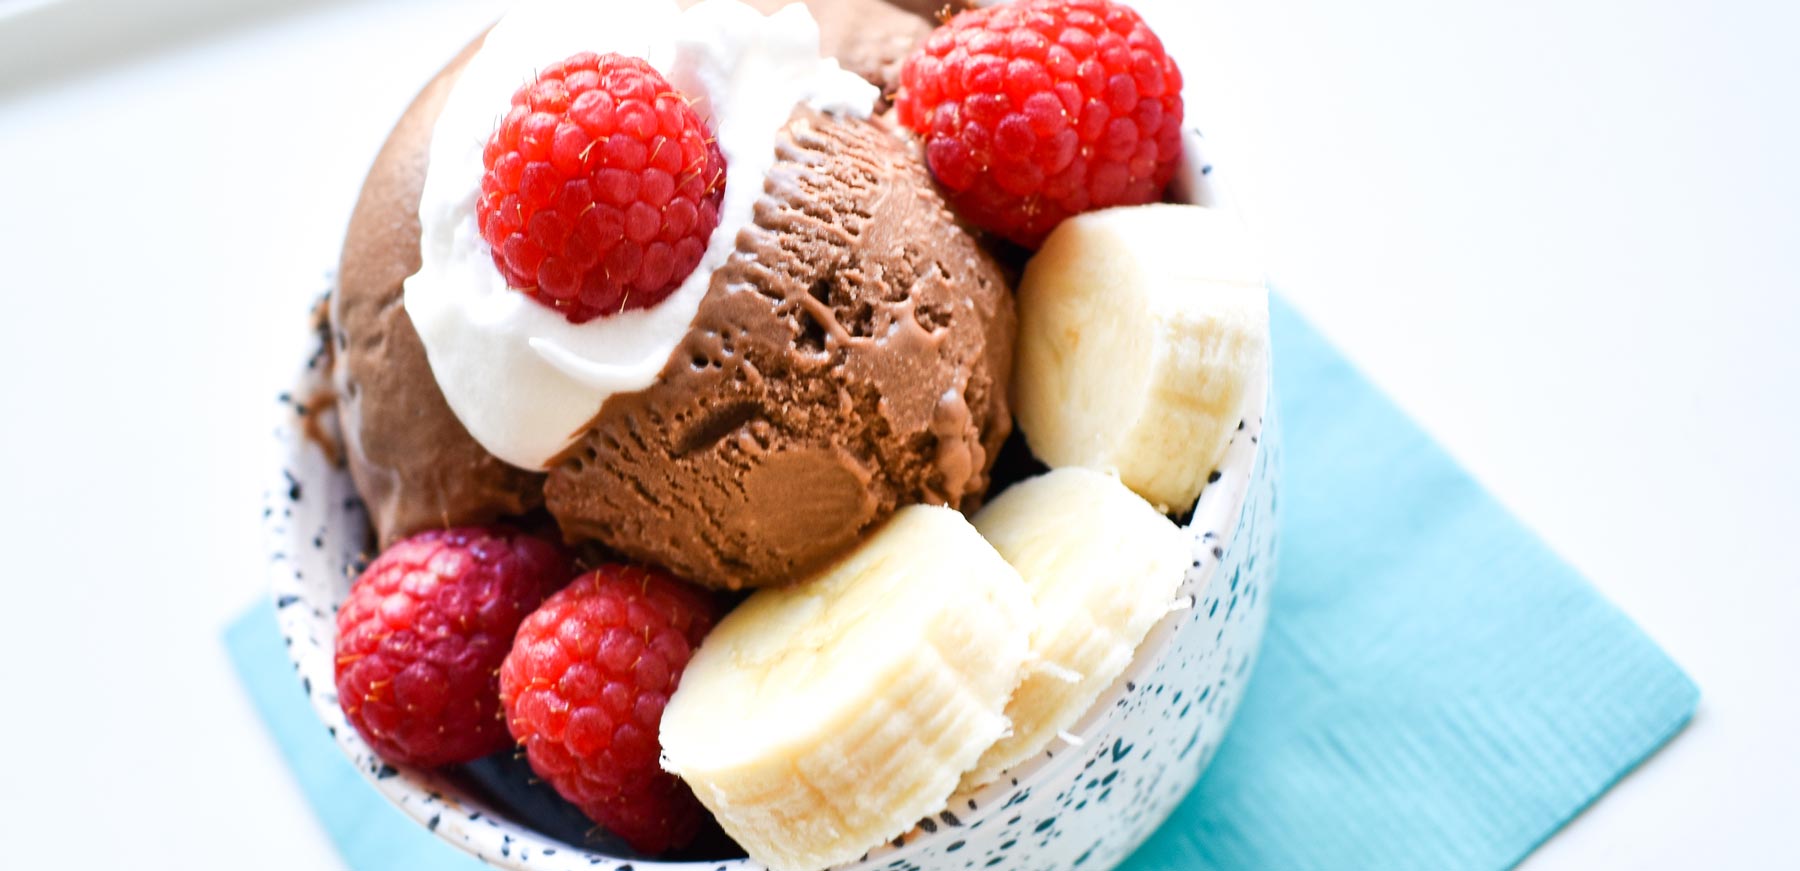 dairy-free, egg-free chocolate ice-cream recipe for food allergy kids